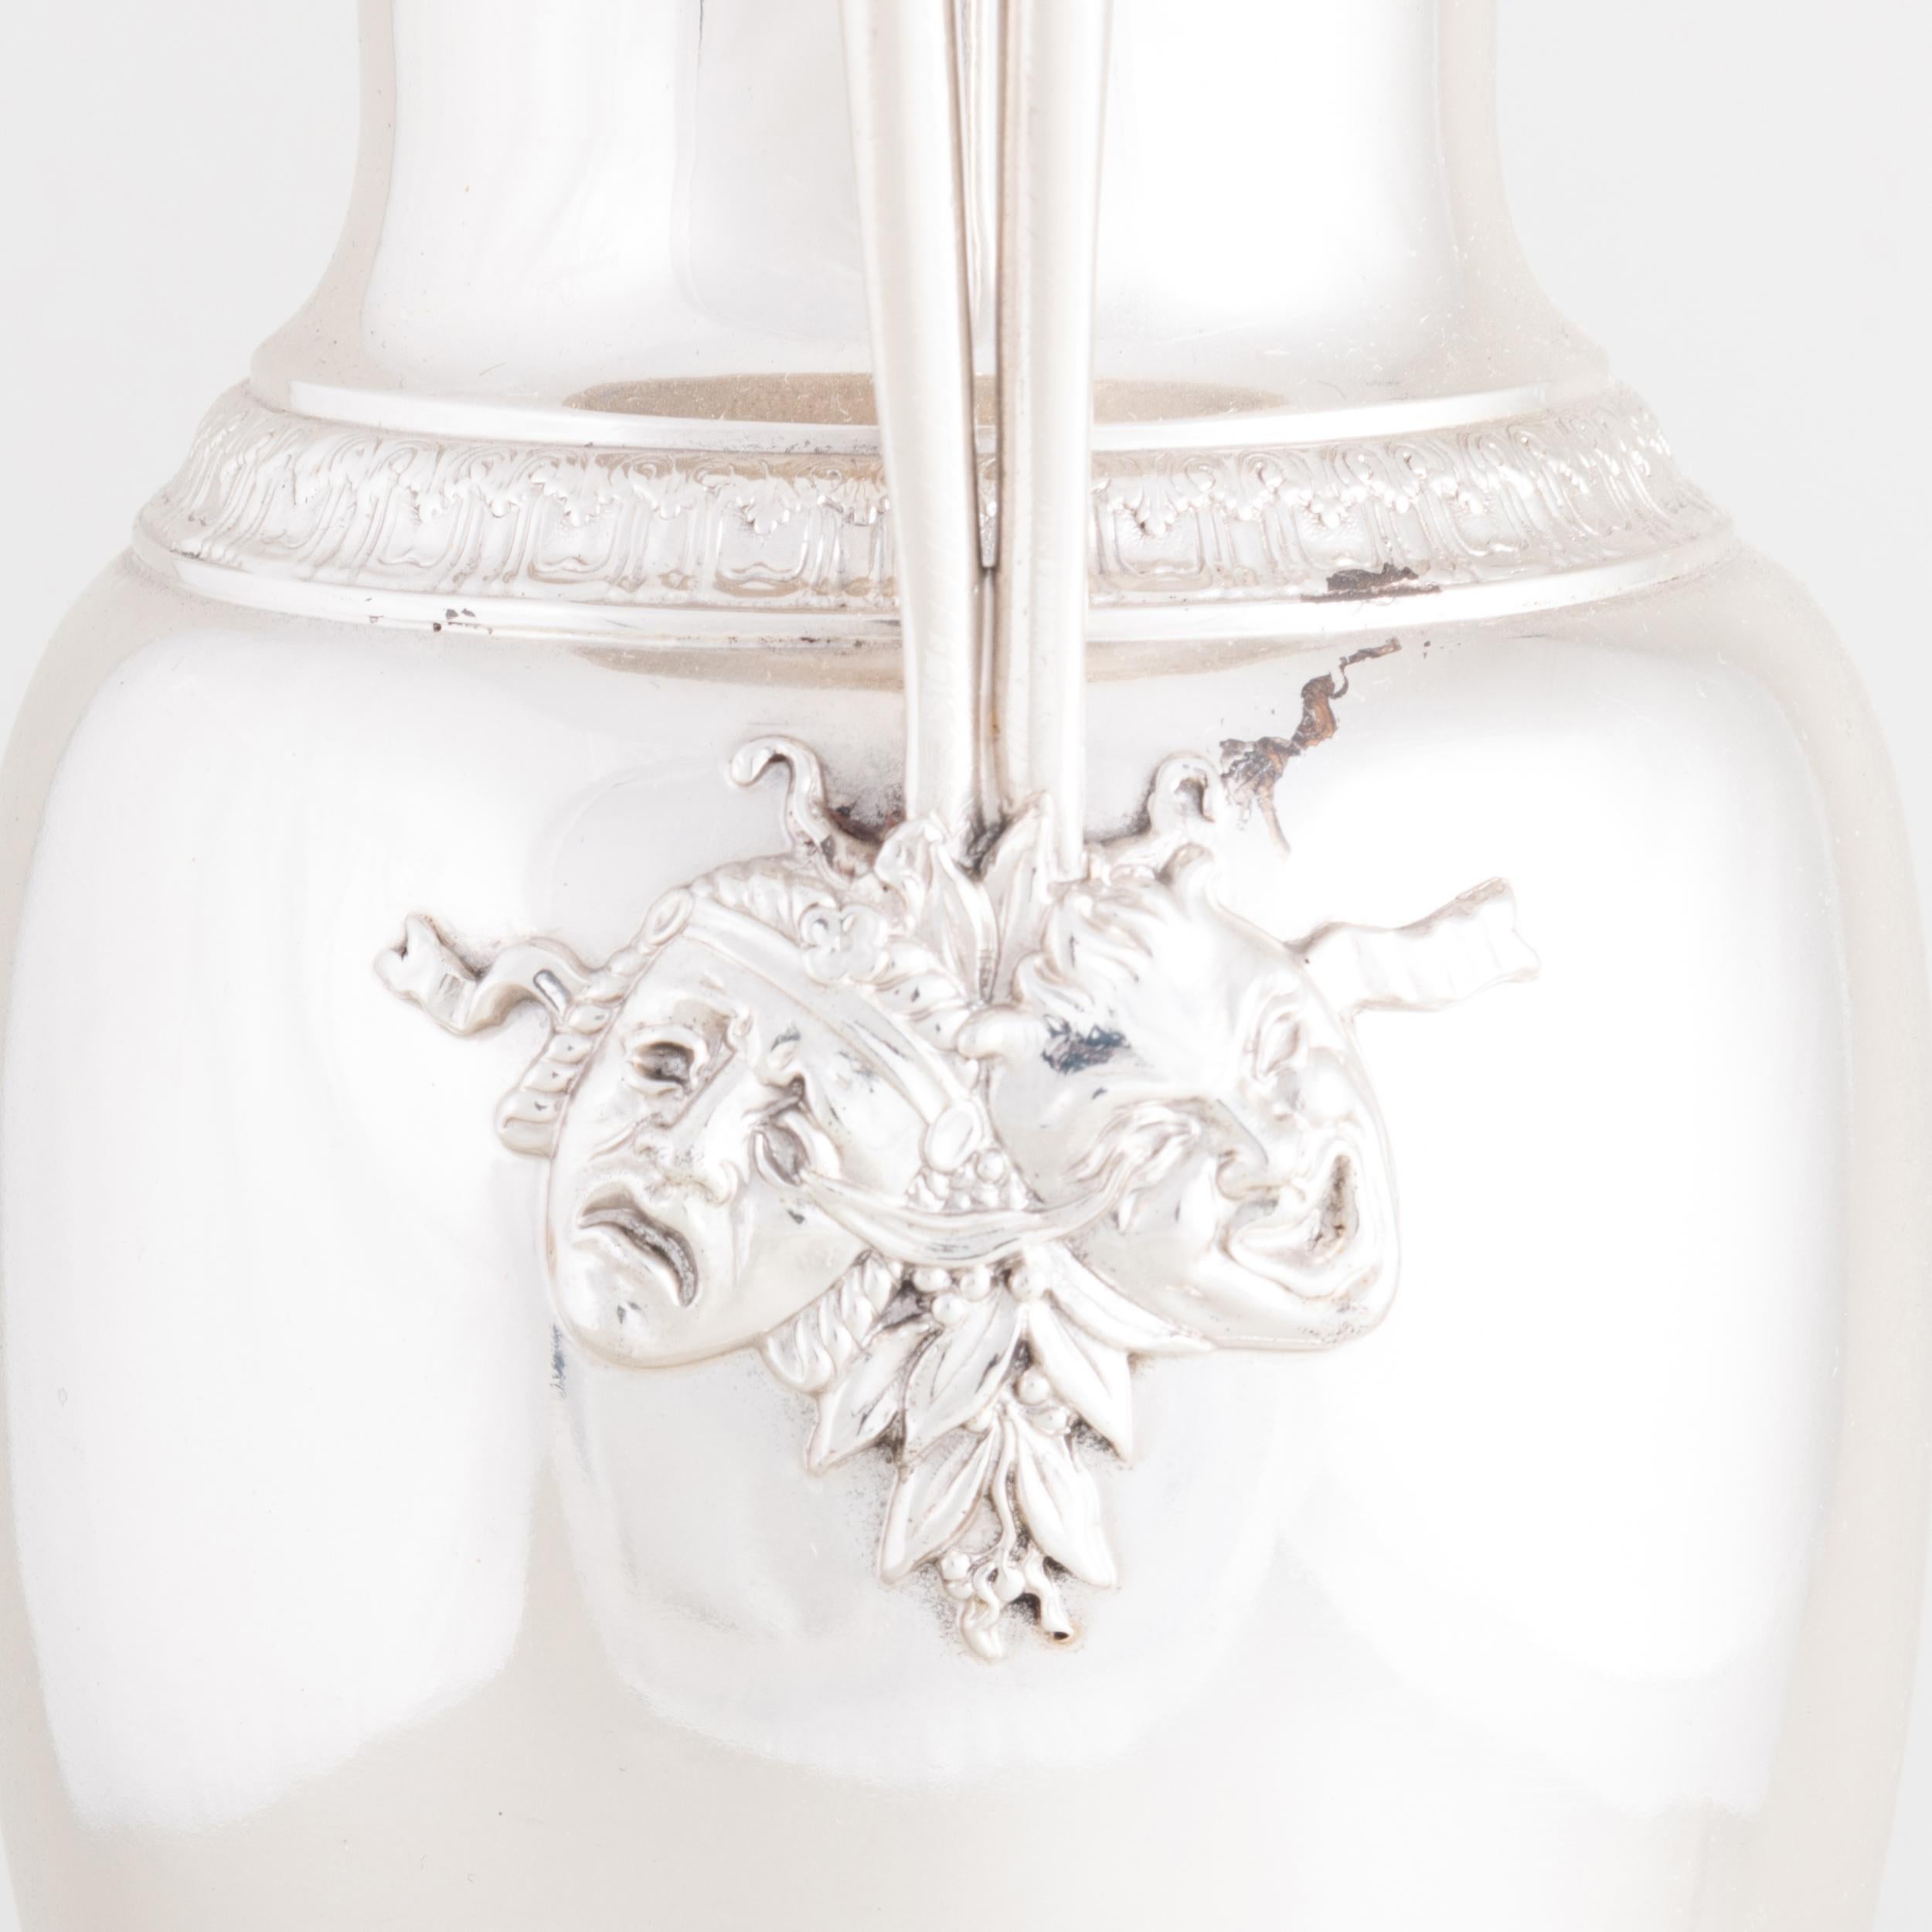 Introducing an exquisite Tall Tiffany & Co Sterling Silver Double Handled Decorative Vase. This remarkable piece boasts the renowned Tiffany & Co craftsmanship and showcases a truly captivating design. The vase features elegant double handles